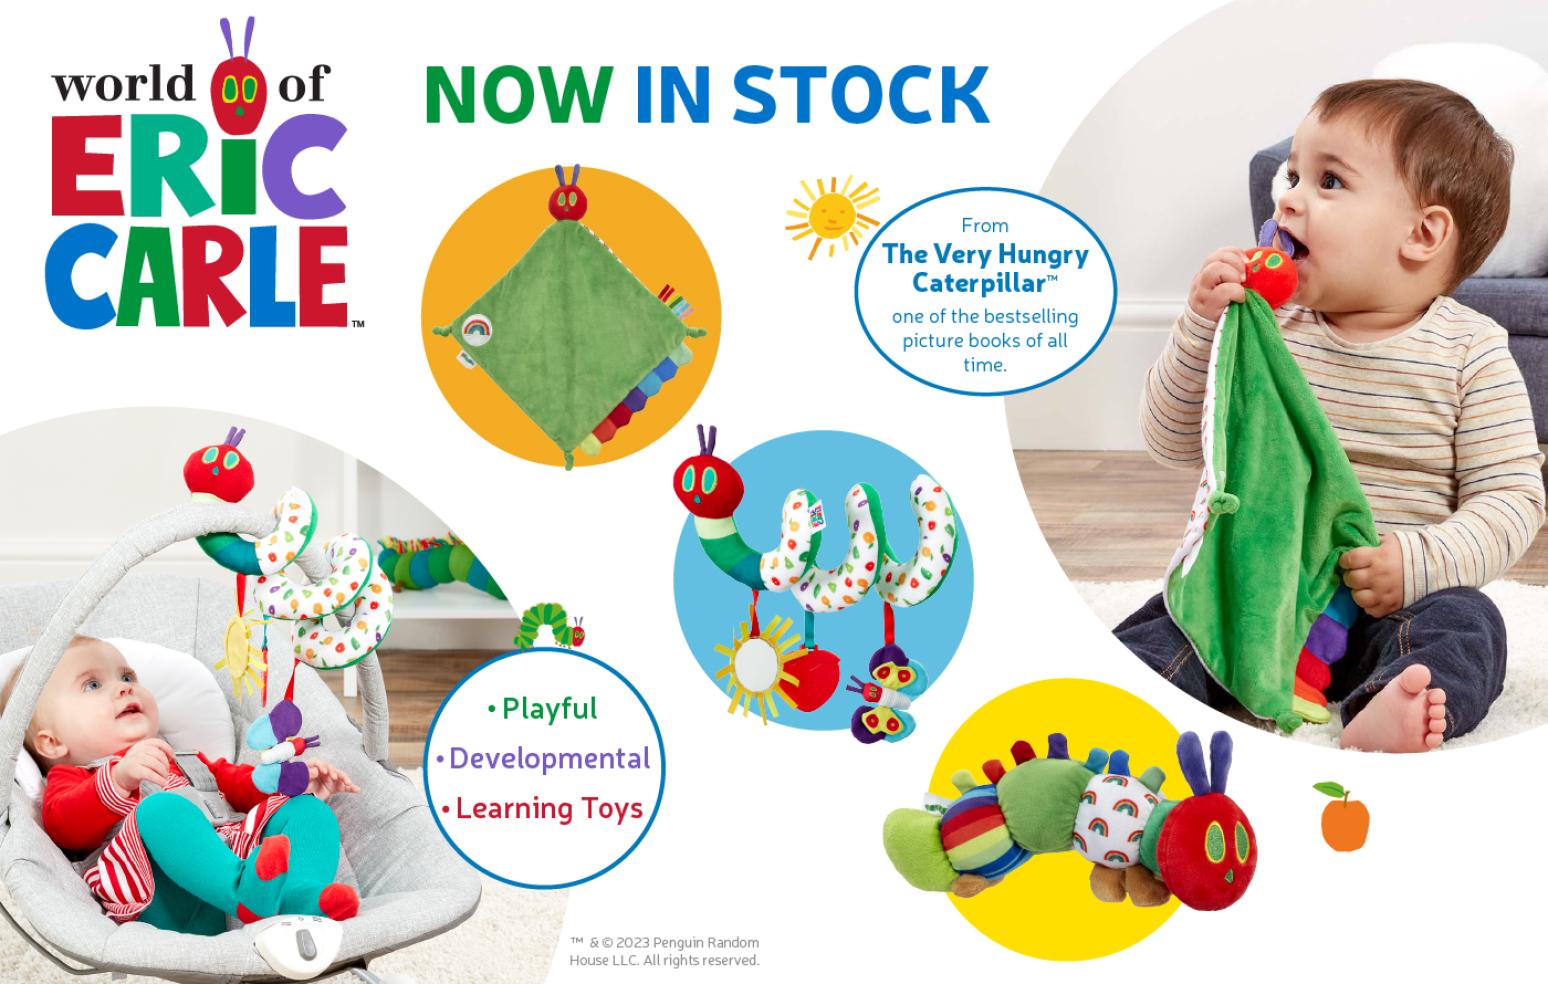 Very Hungry Caterpillar NOW IN STOCK